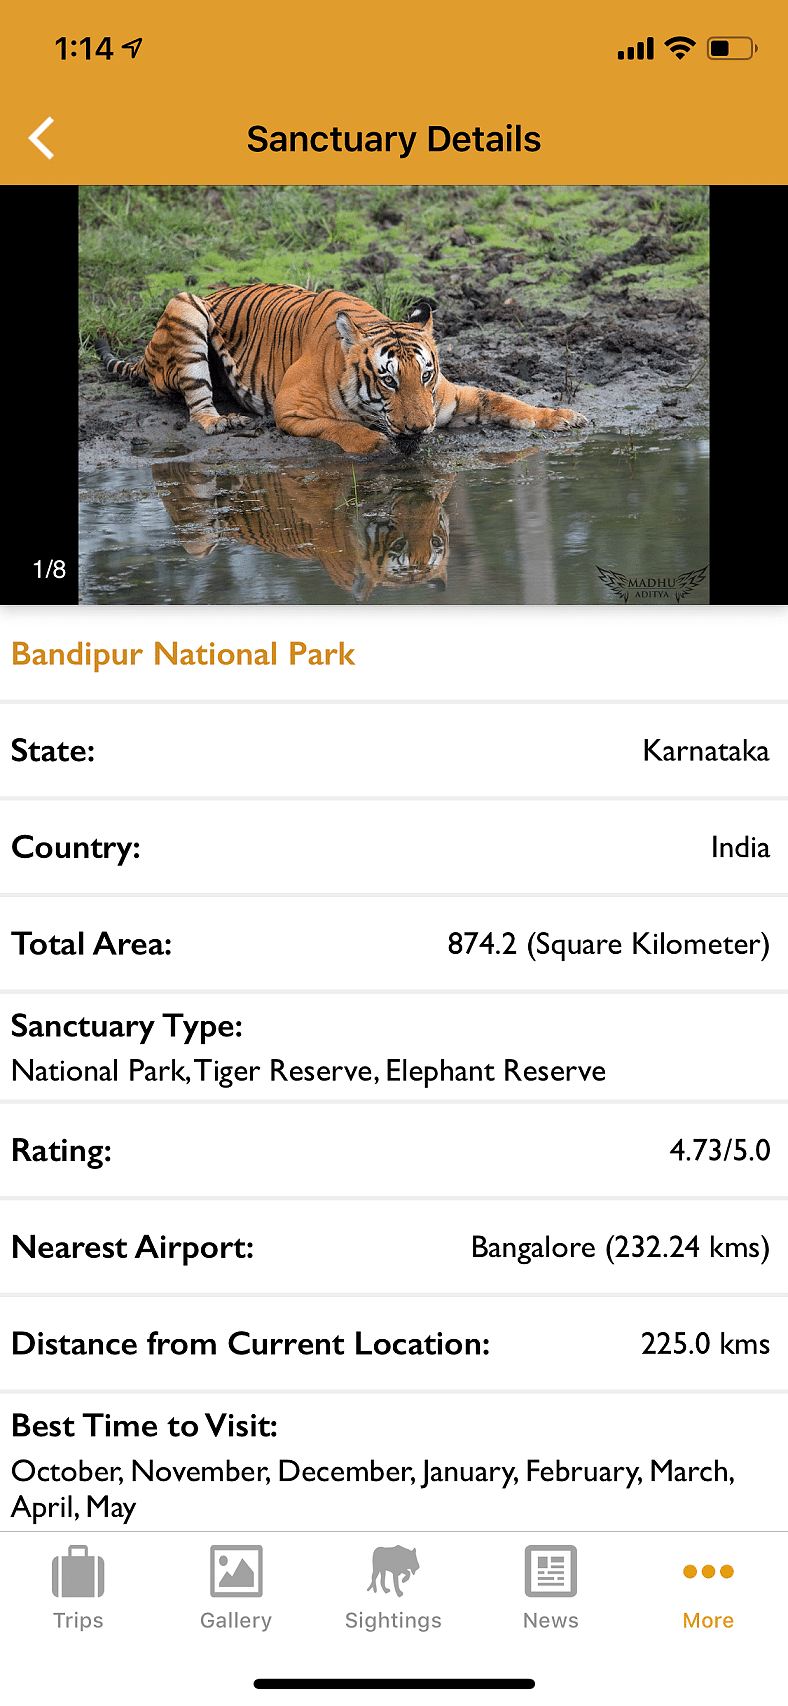 Details of 600 sanctuaries and forests in the  country are listed on the app. 